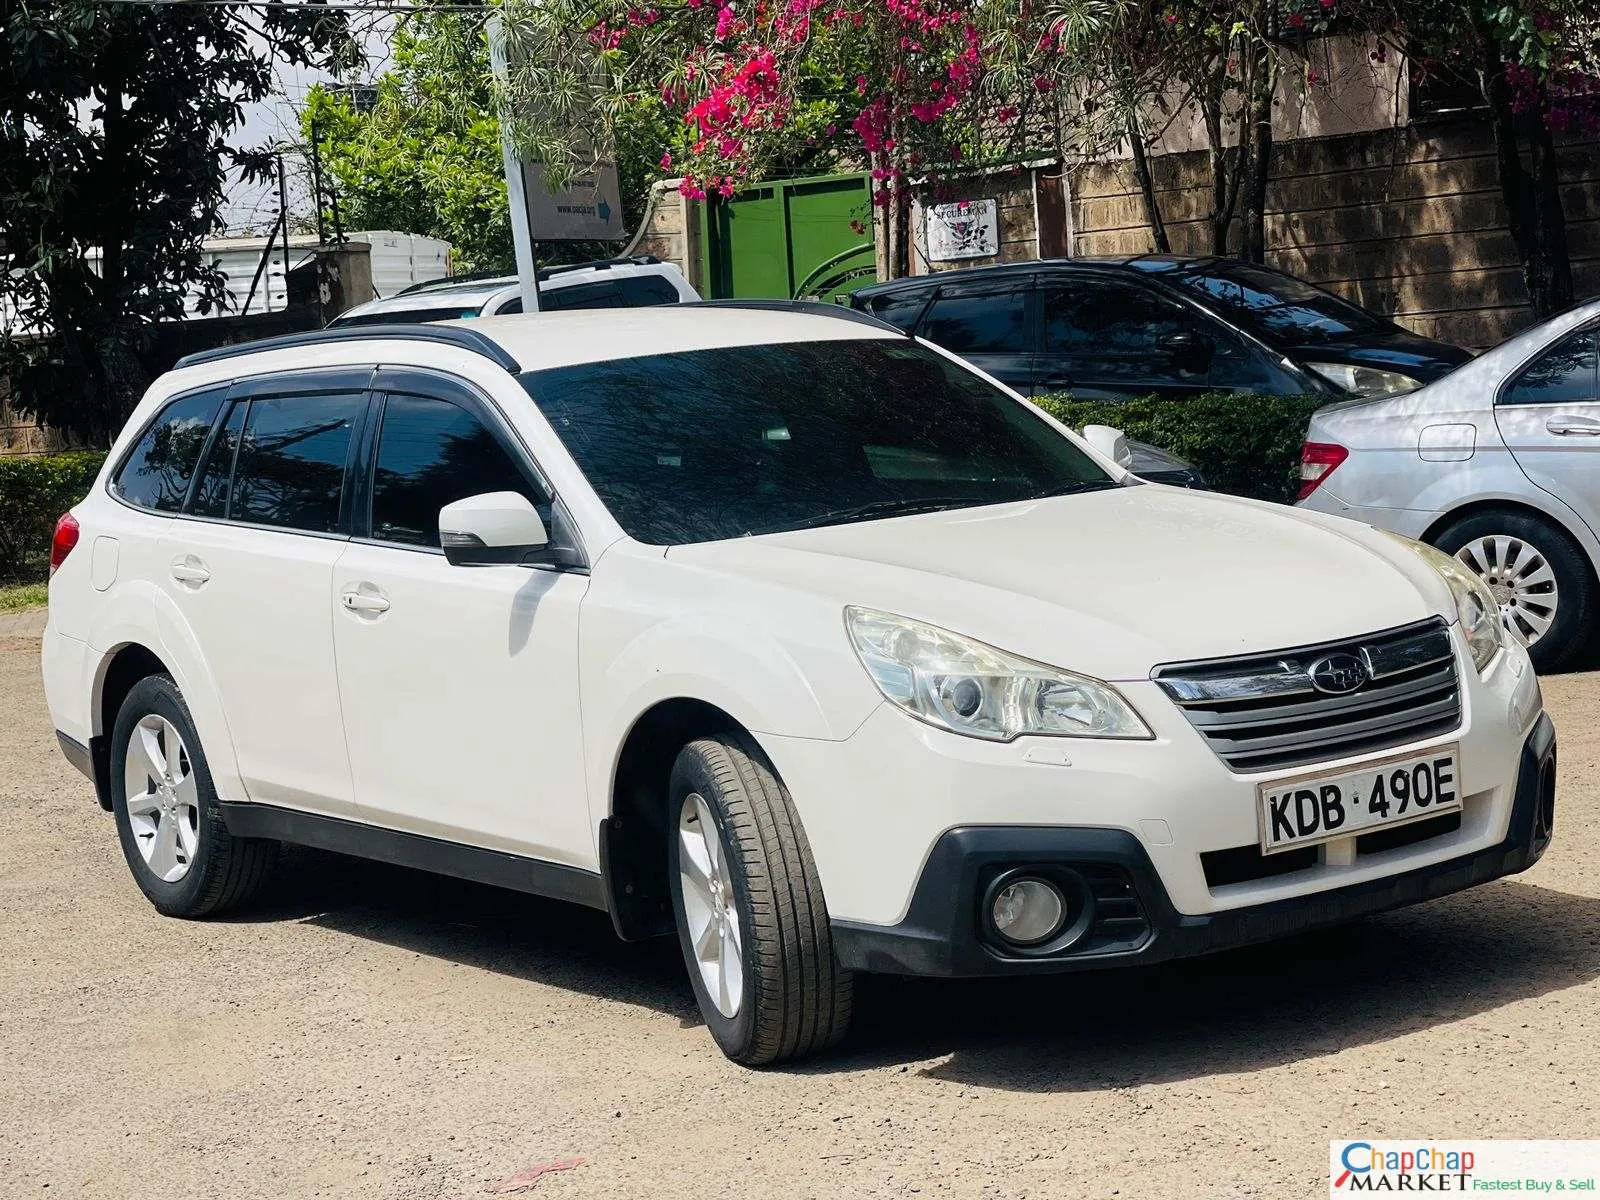 Subaru OUTBACK for sale in kenya hire purchase installments You Pay 30% Deposit Trade in Ok outback Kenya exclusive